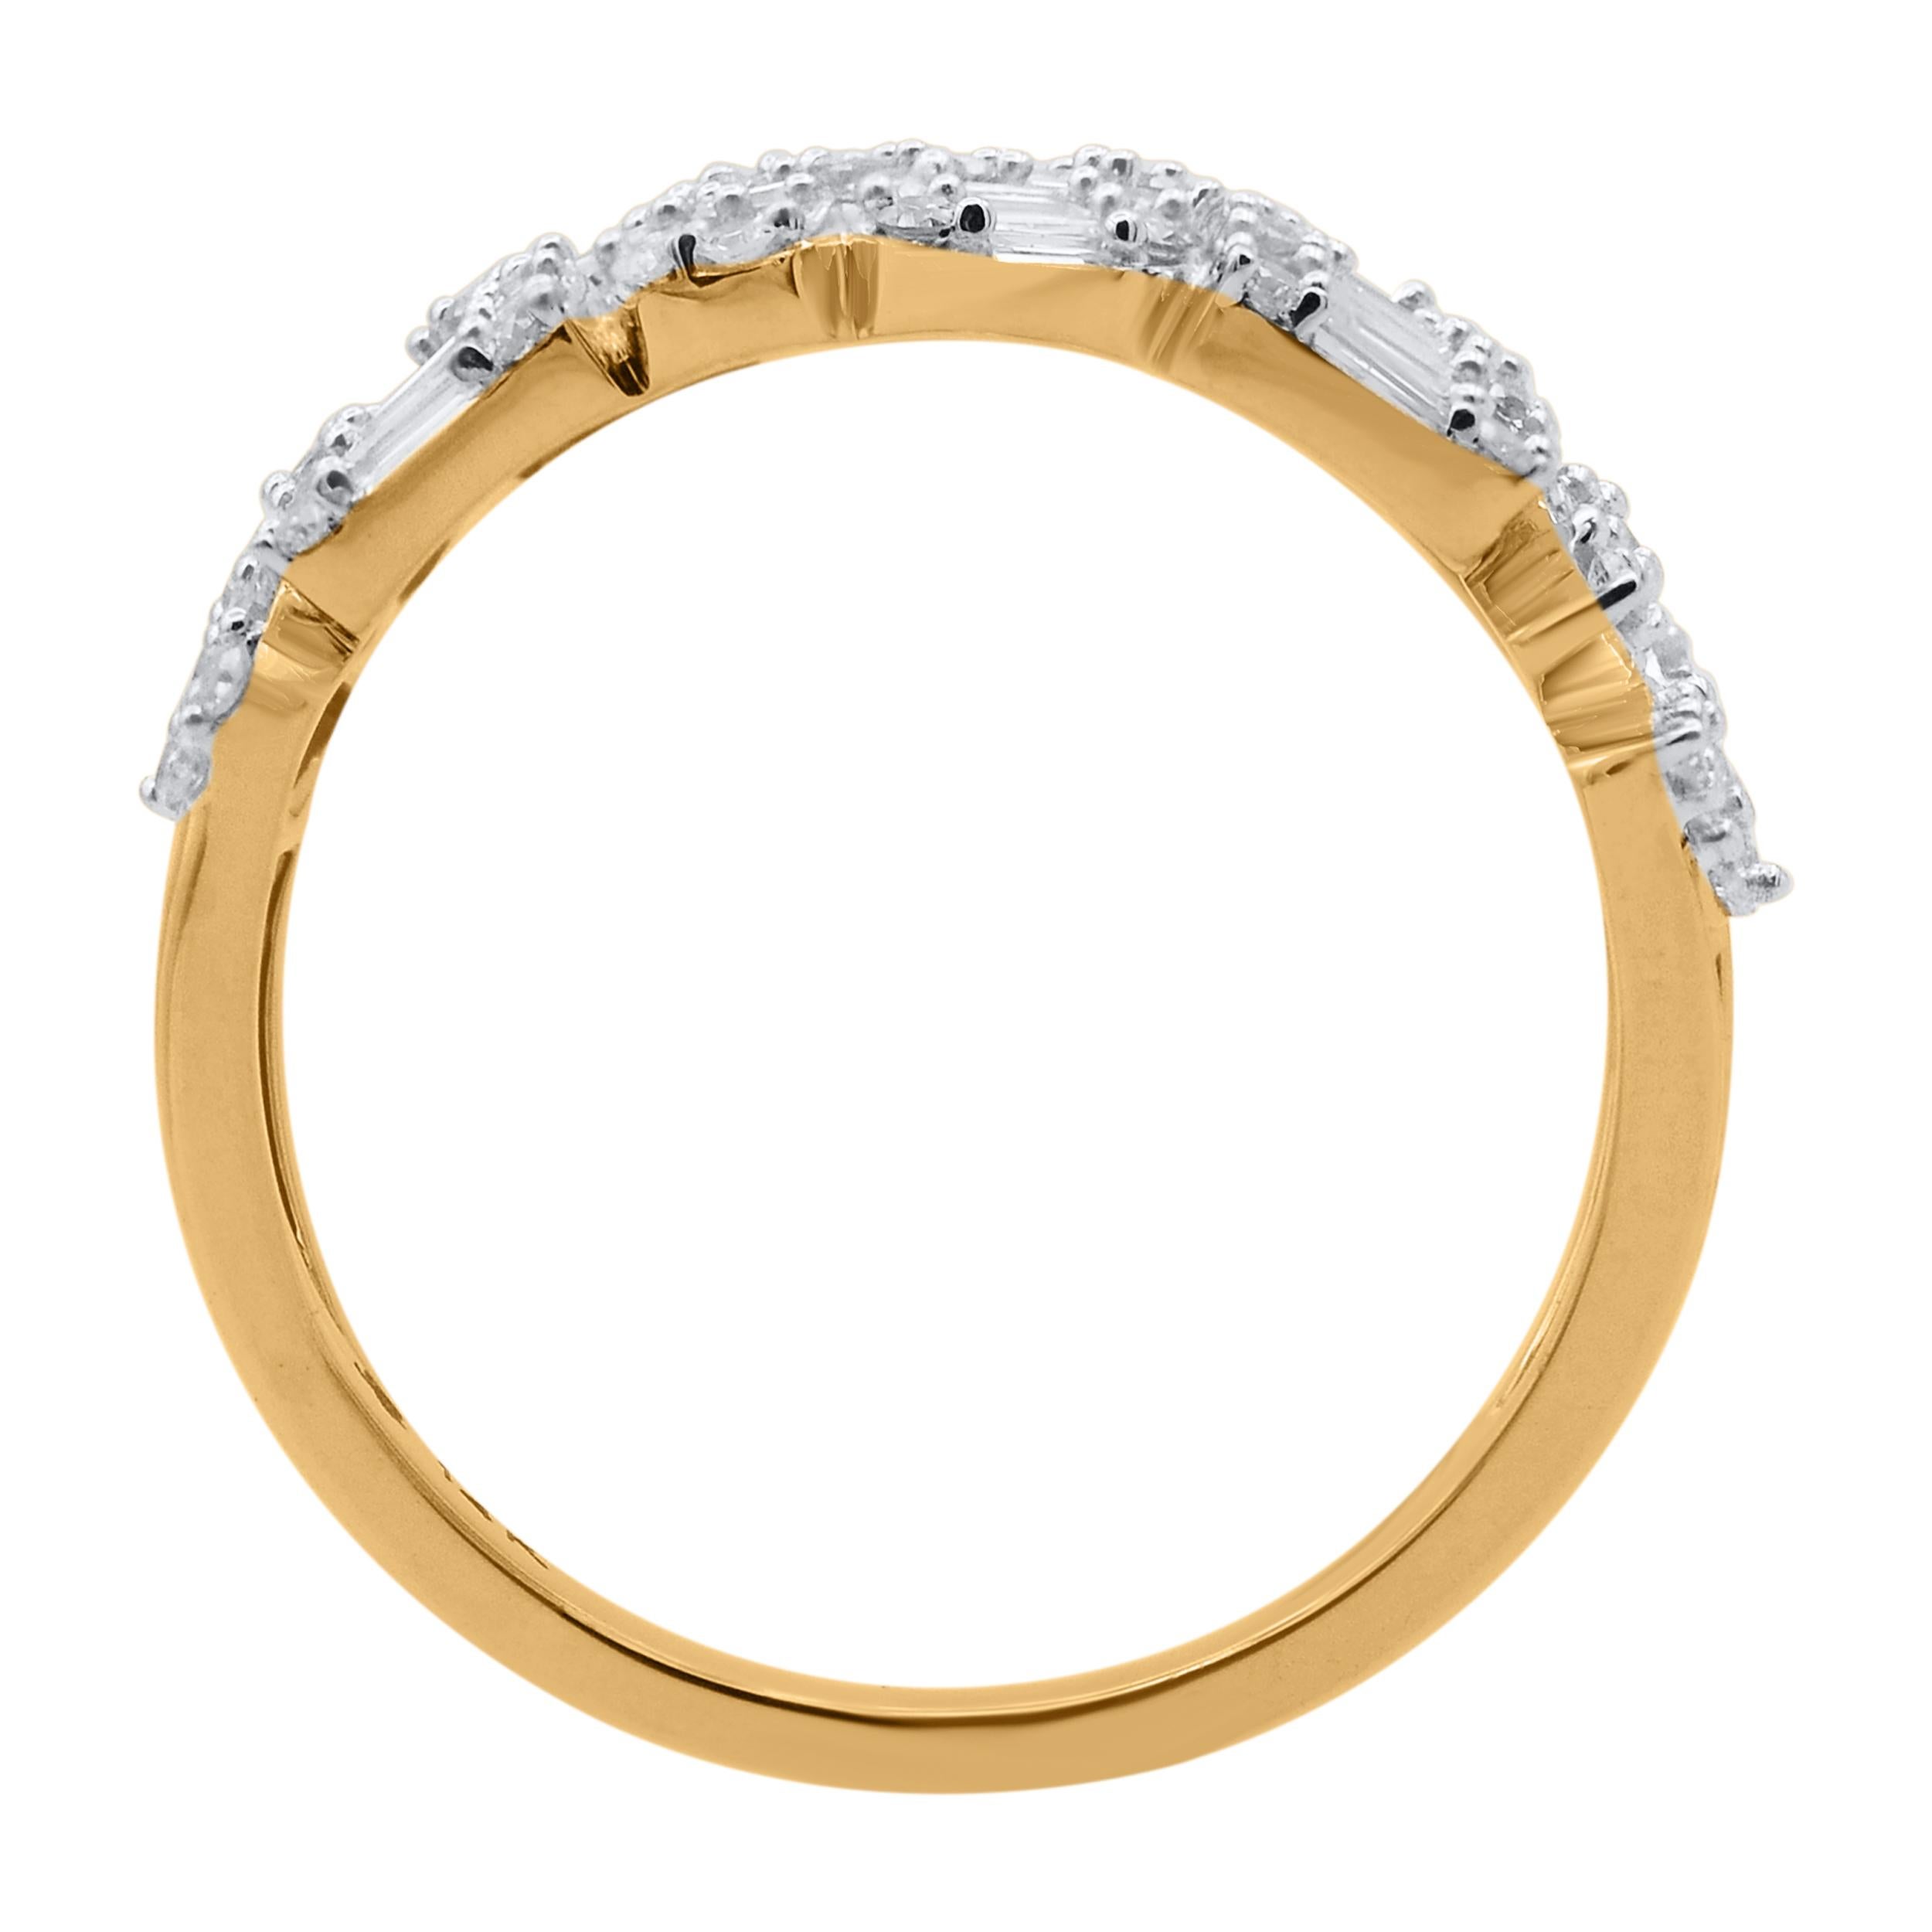 Bring charm to your look with this diamond ring. The ring is crafted from 14-karat gold in your choice of white, rose, or yellow, and features Round Brilliant 60 and Baguette - 63 white diamonds, Prong set, H-I color I2 clarity and a high polish